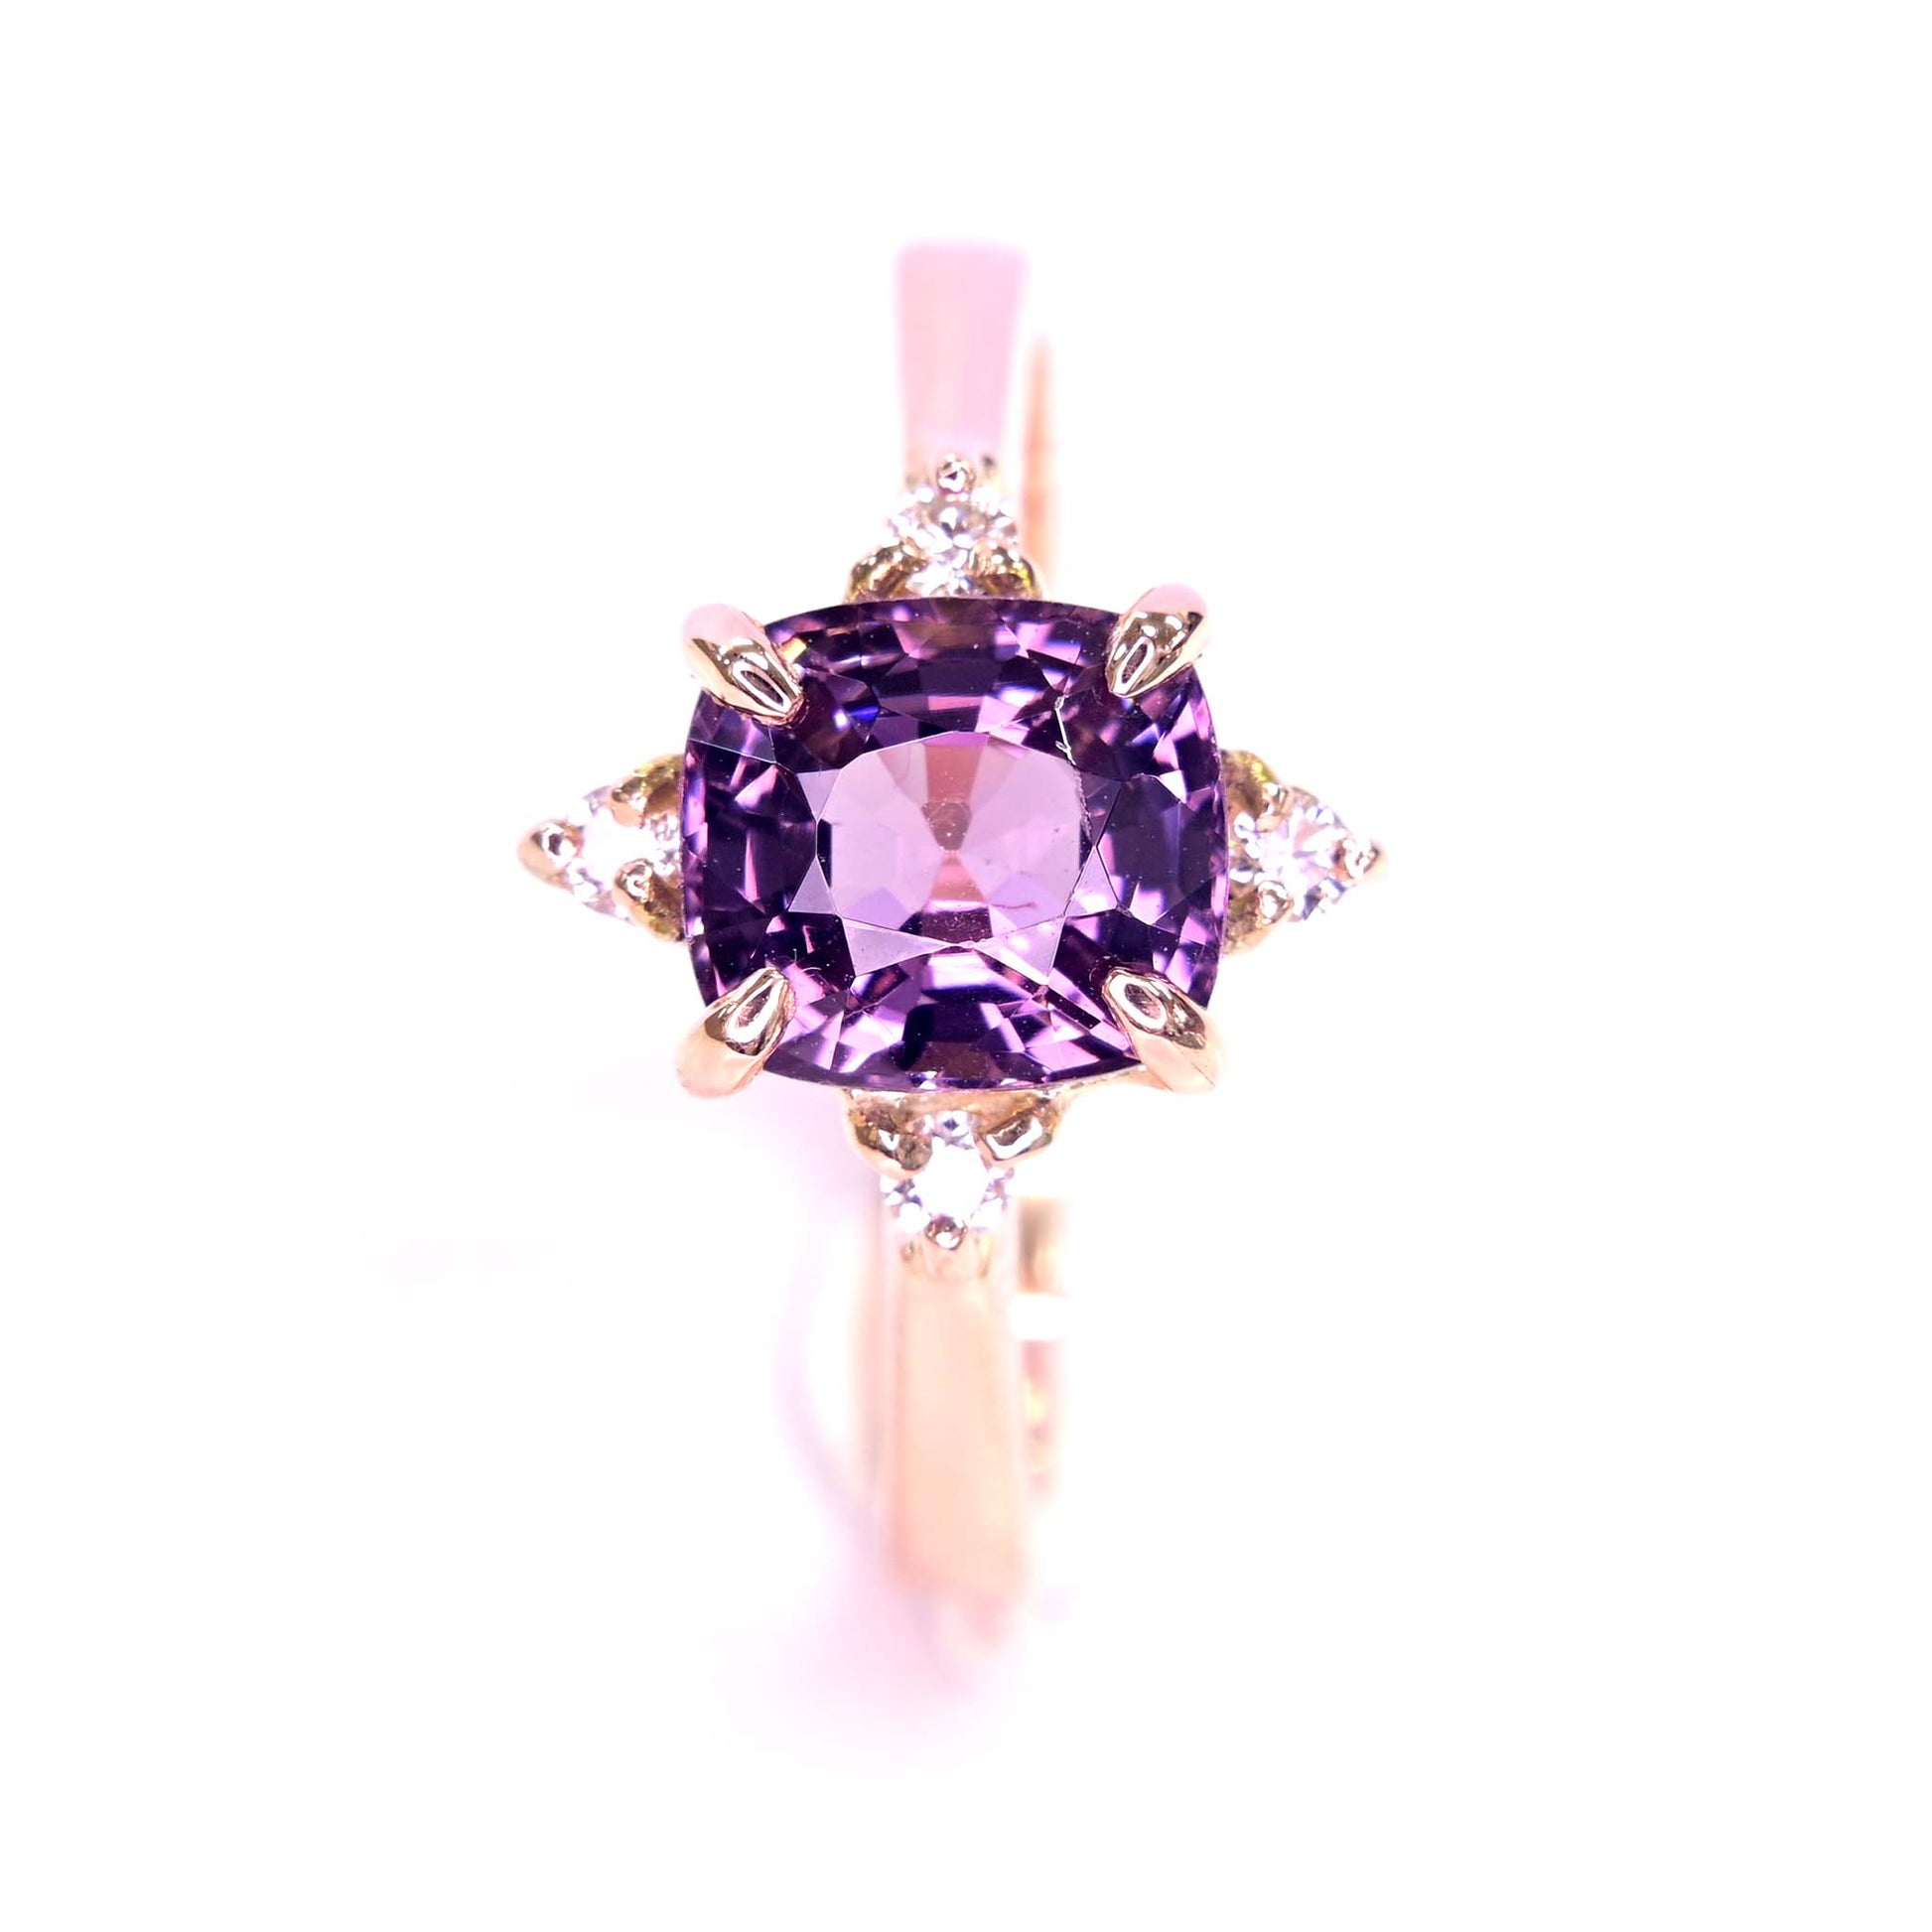 Pink spinel and diamonds set in 14k rose gold